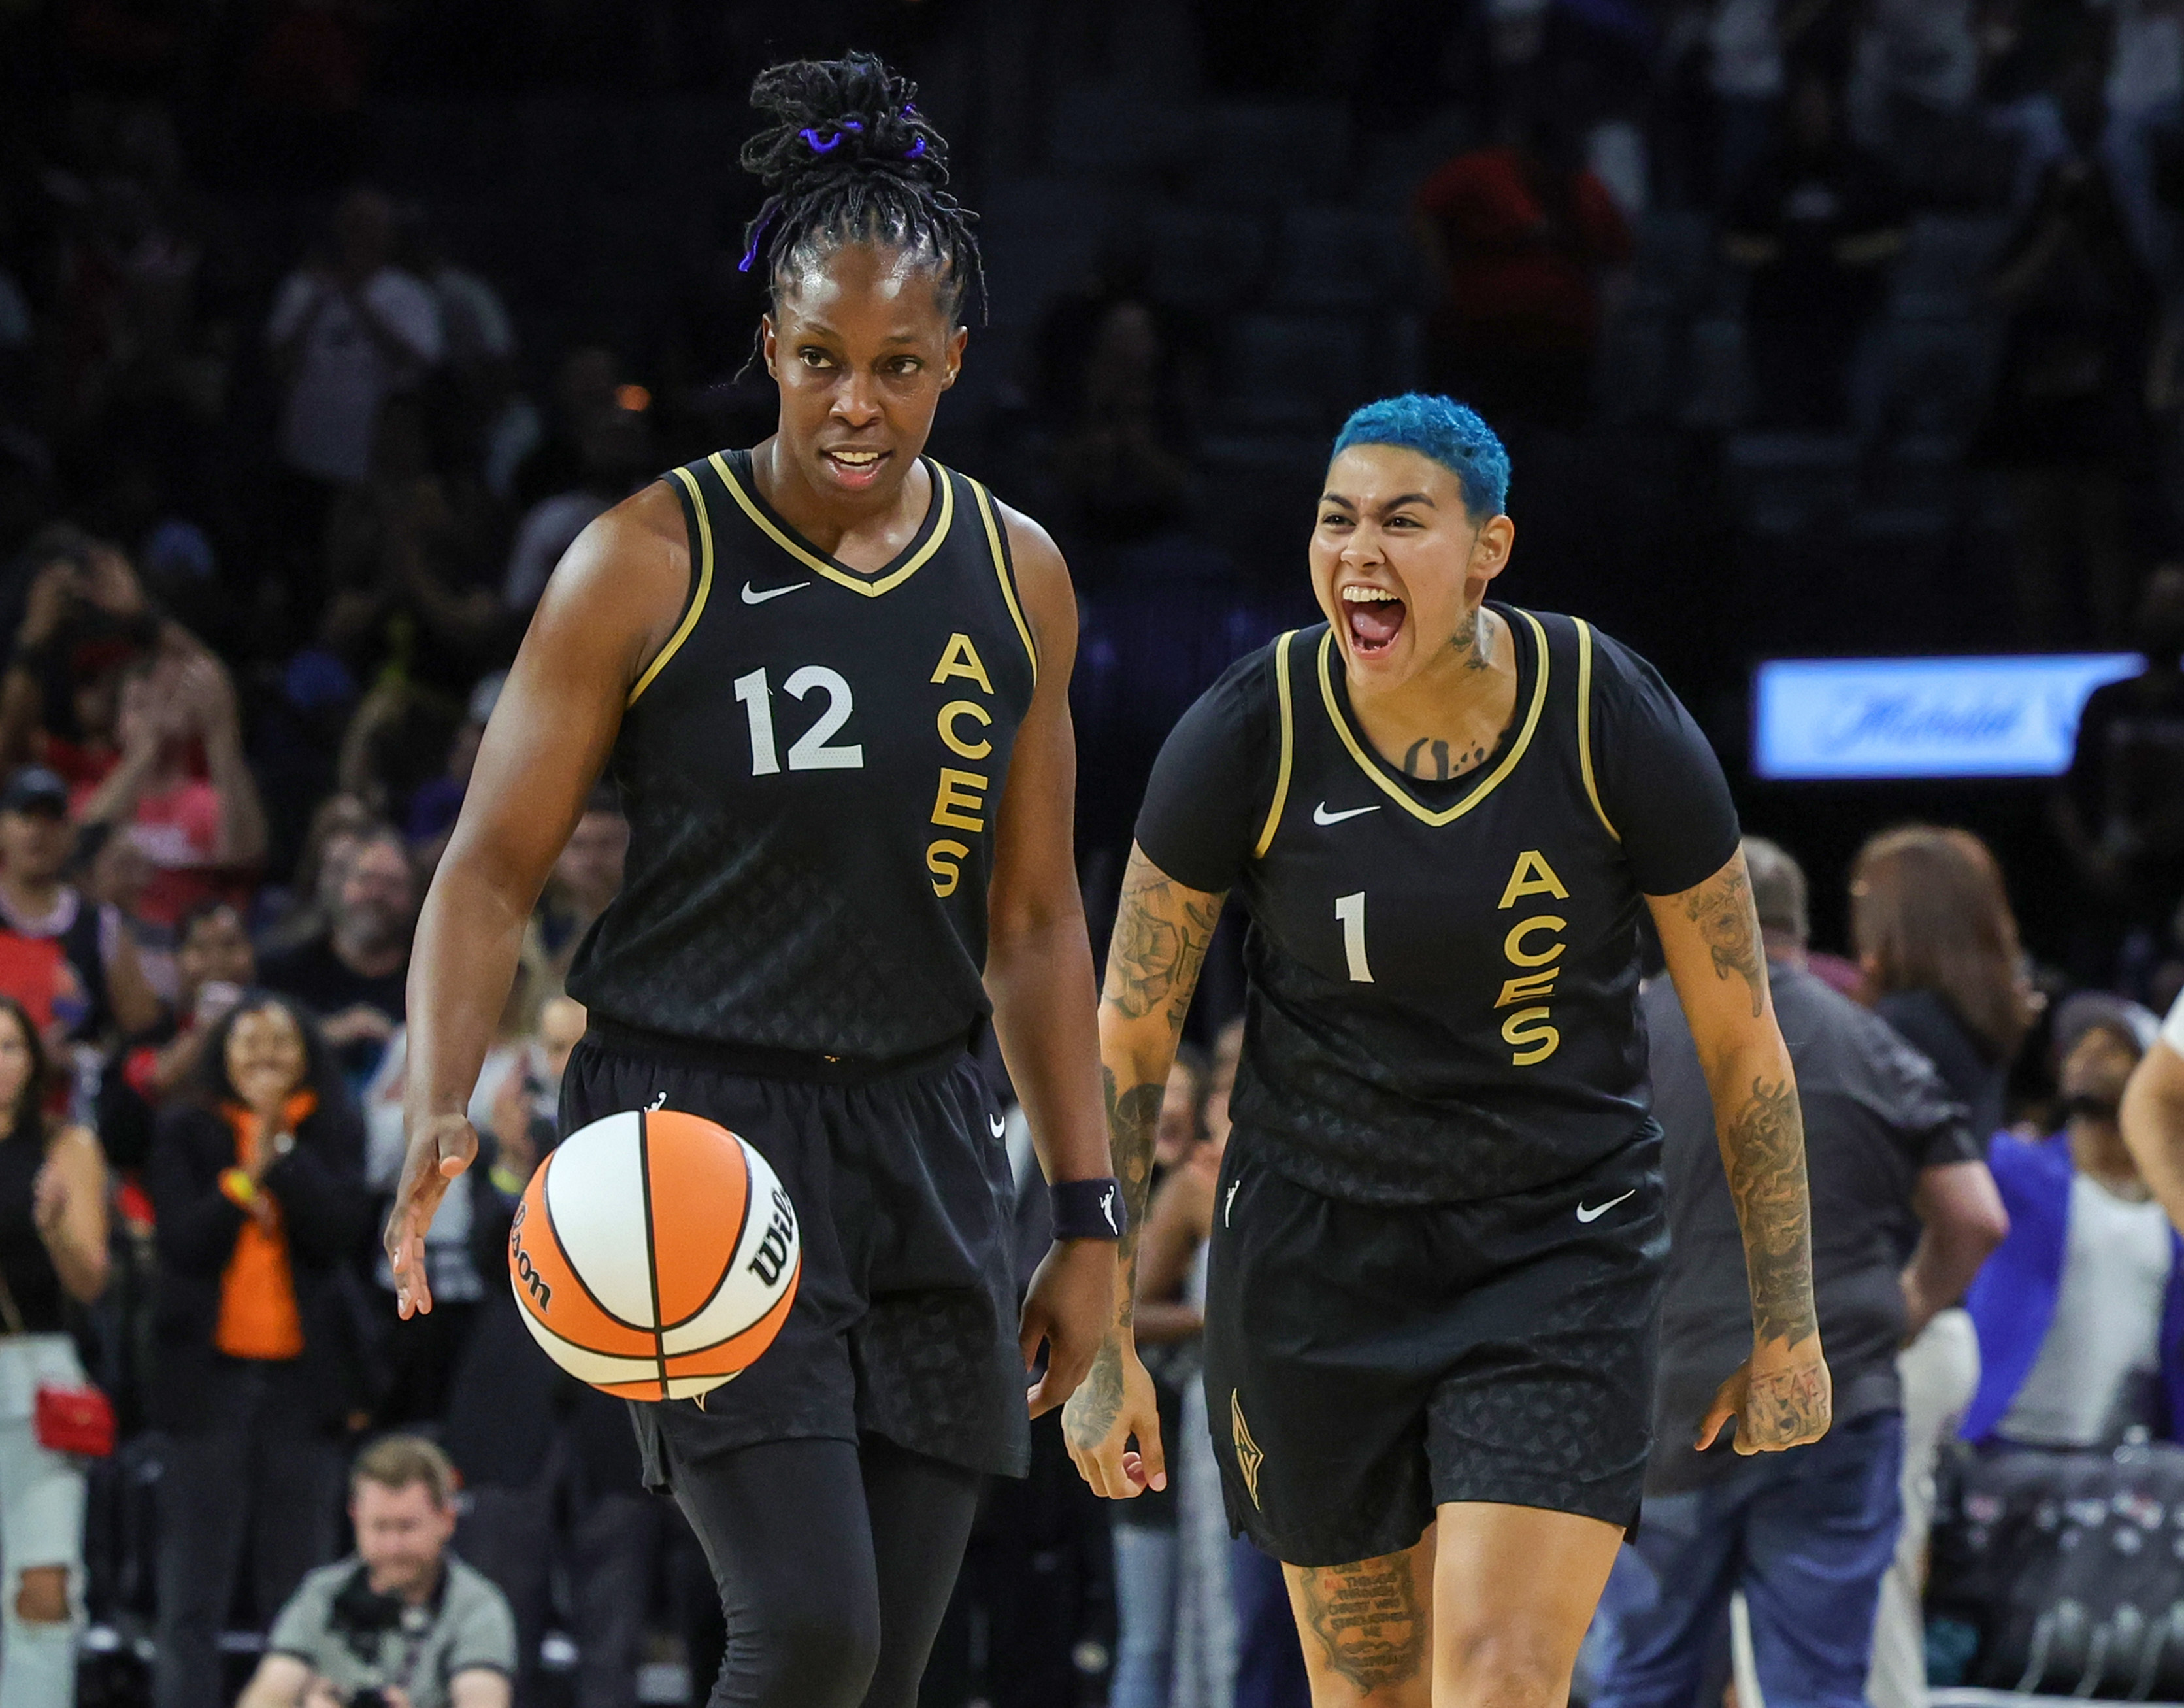 Ogunbowale leads WNBA All-Stars over US Olympic team 93-85 – The